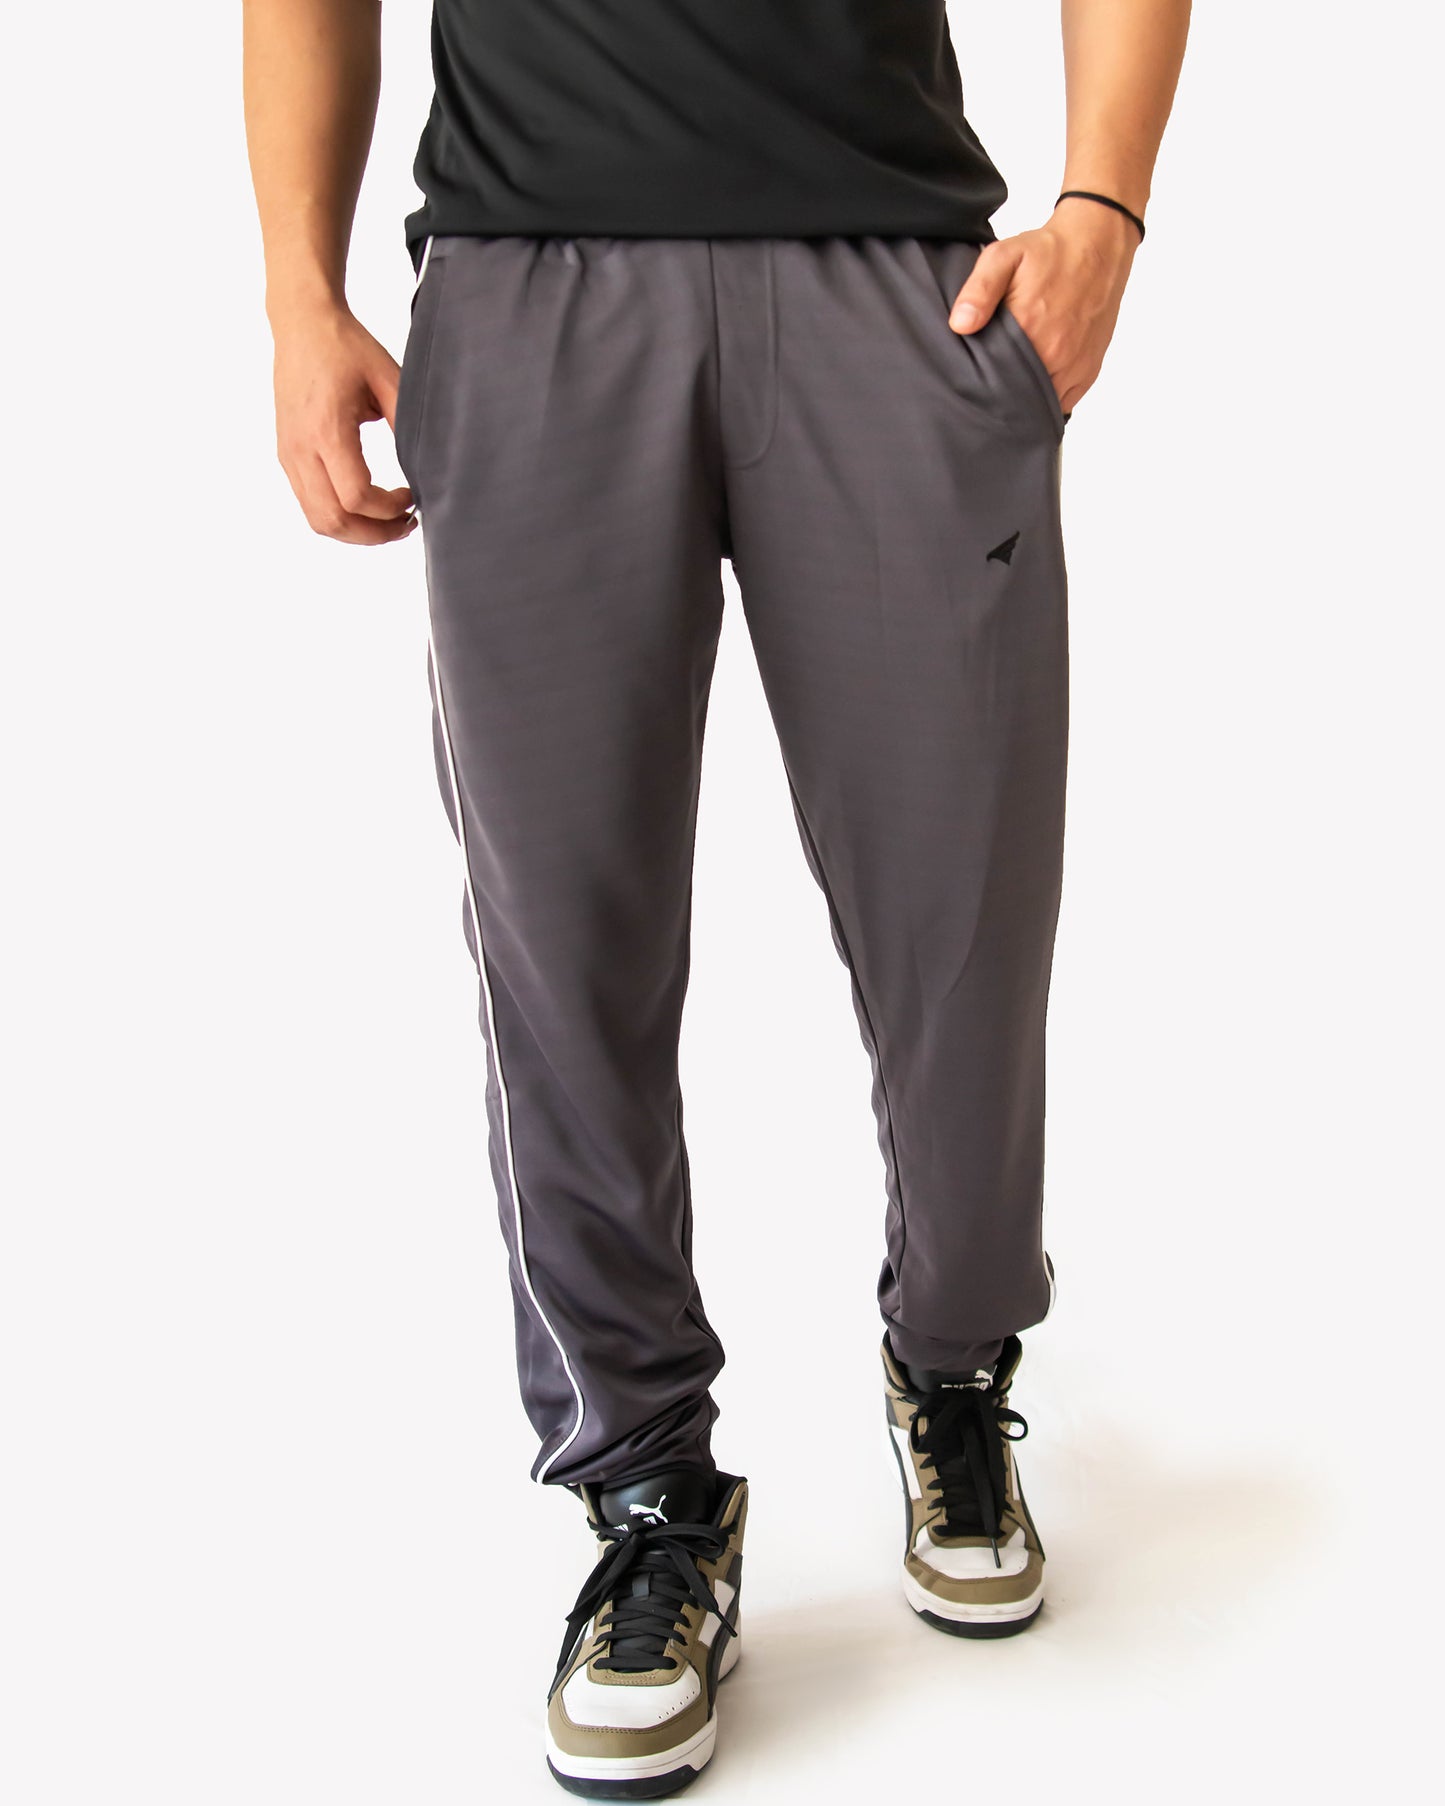 DRY-FIT TROUSER- CRATIN